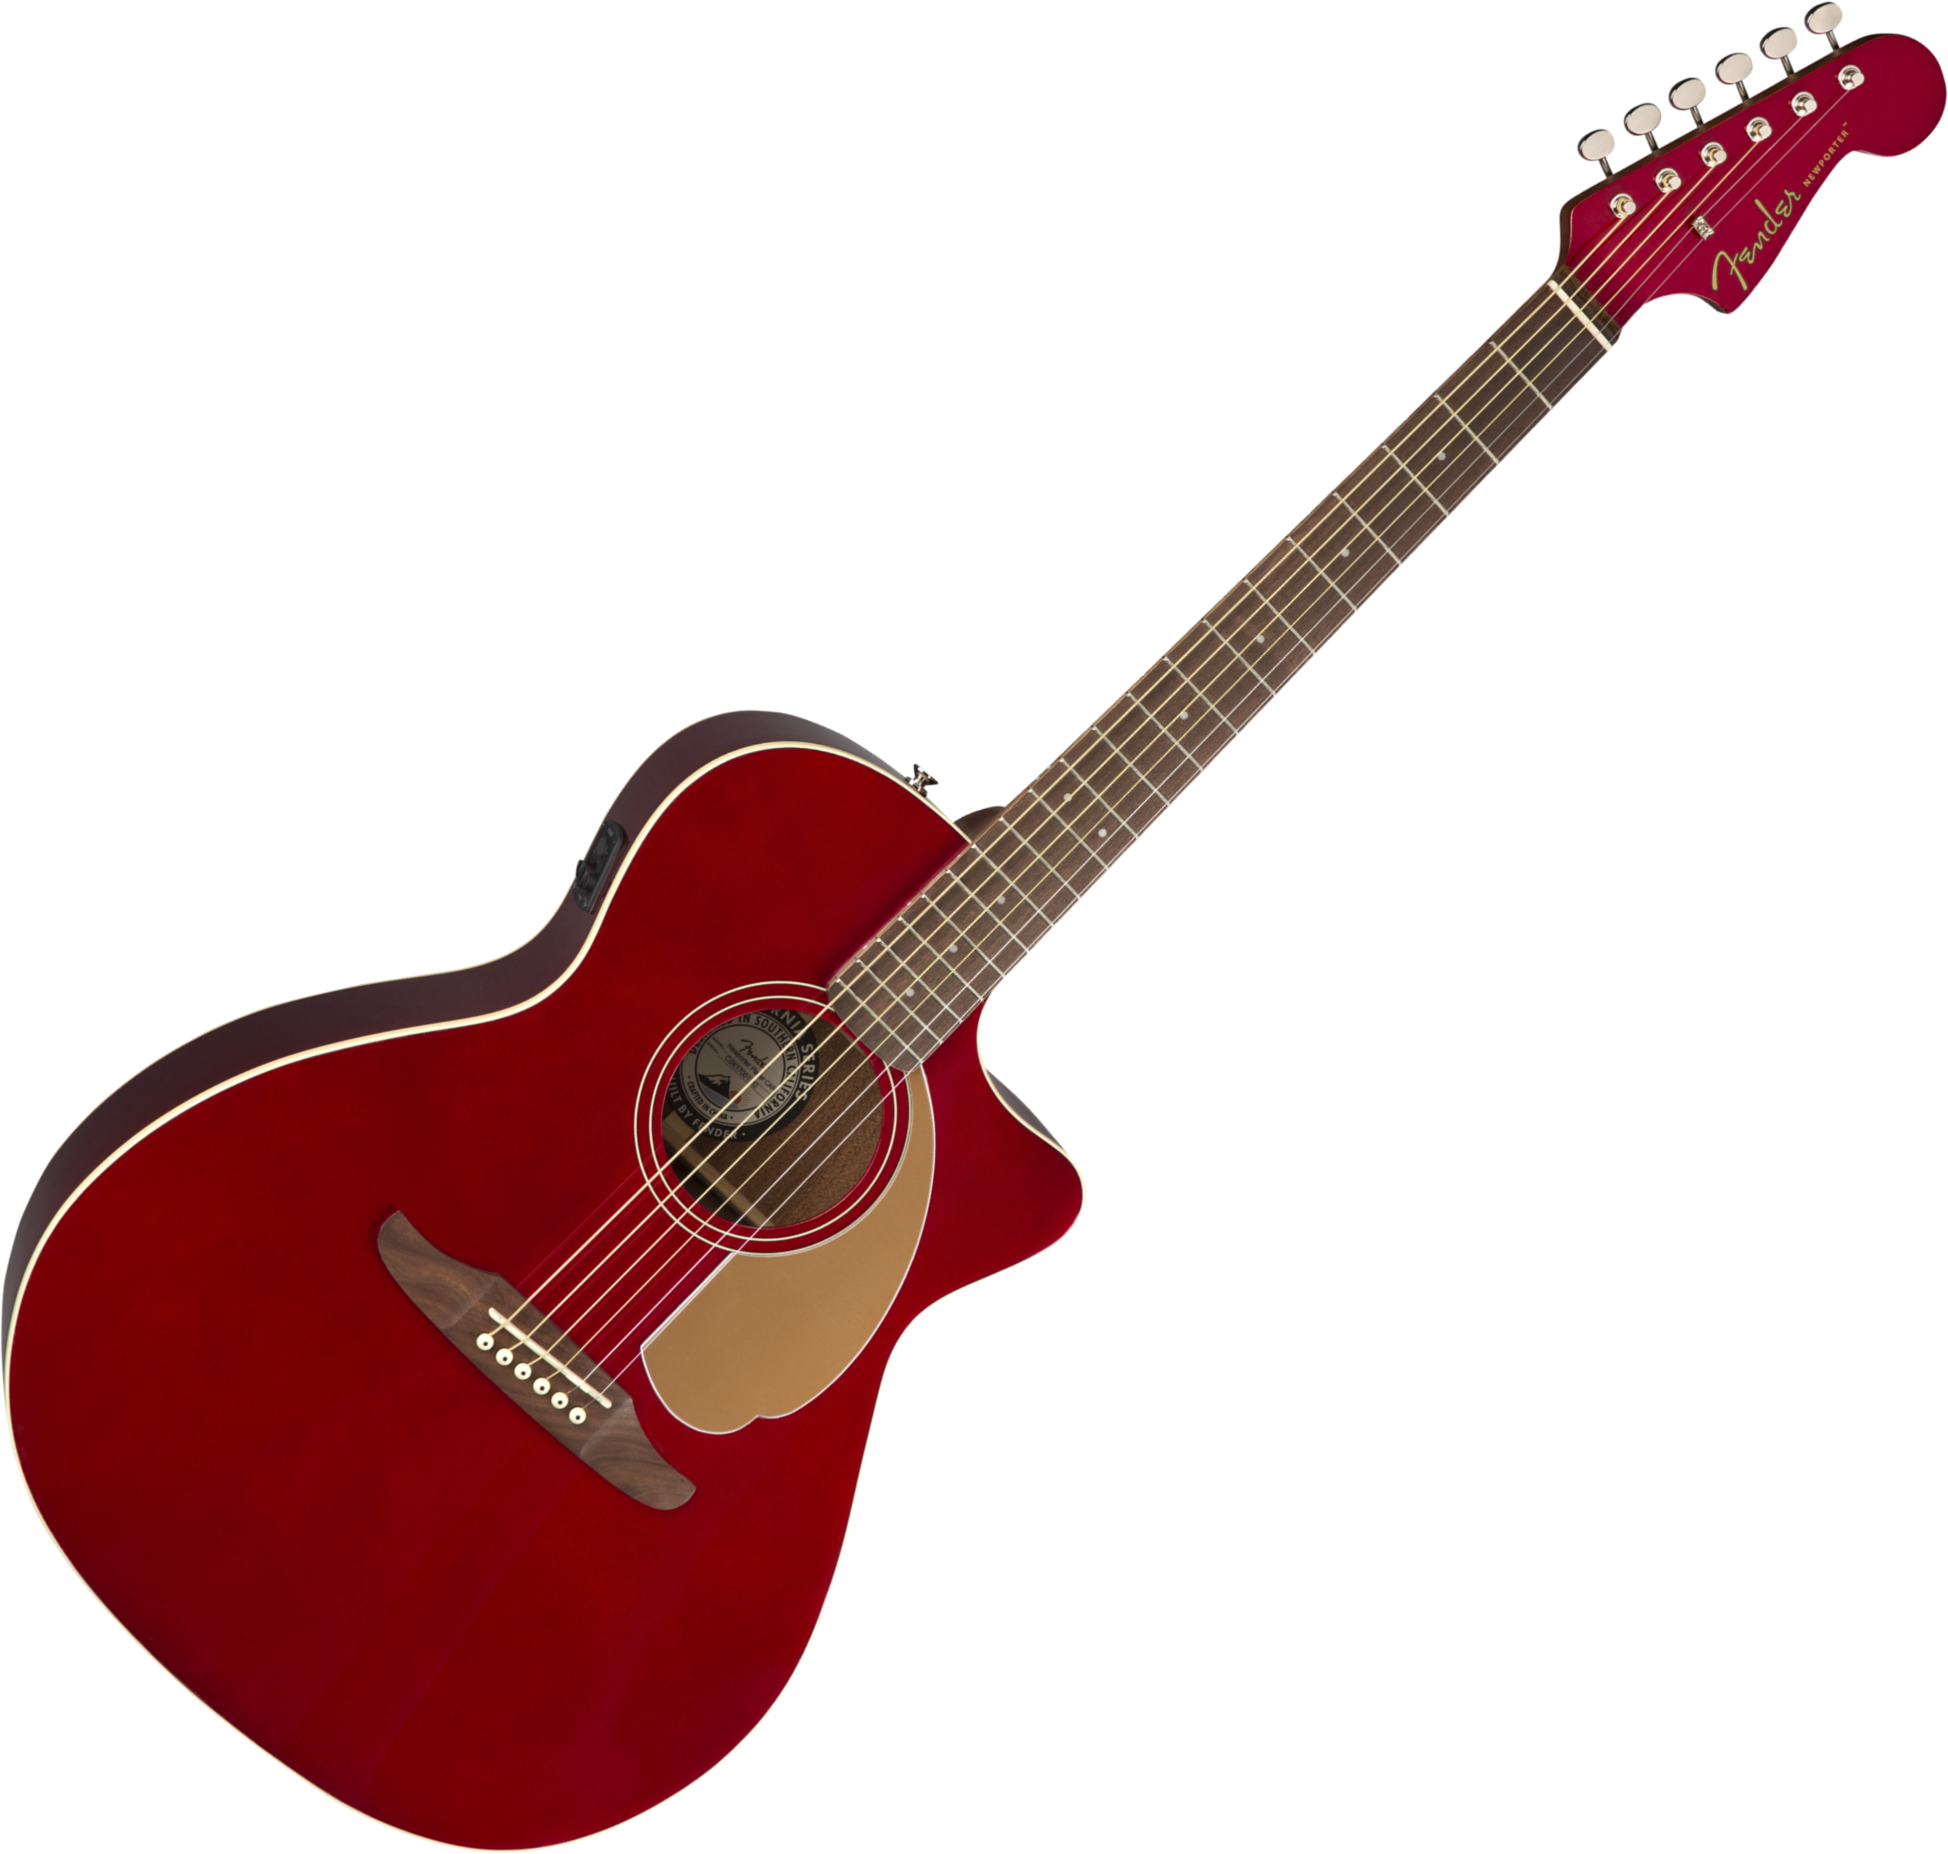 Fender Newporter Player Auditorium Cw Epicea Acajou Wal - Candy Apple Red - Electro acoustic guitar - Variation 1